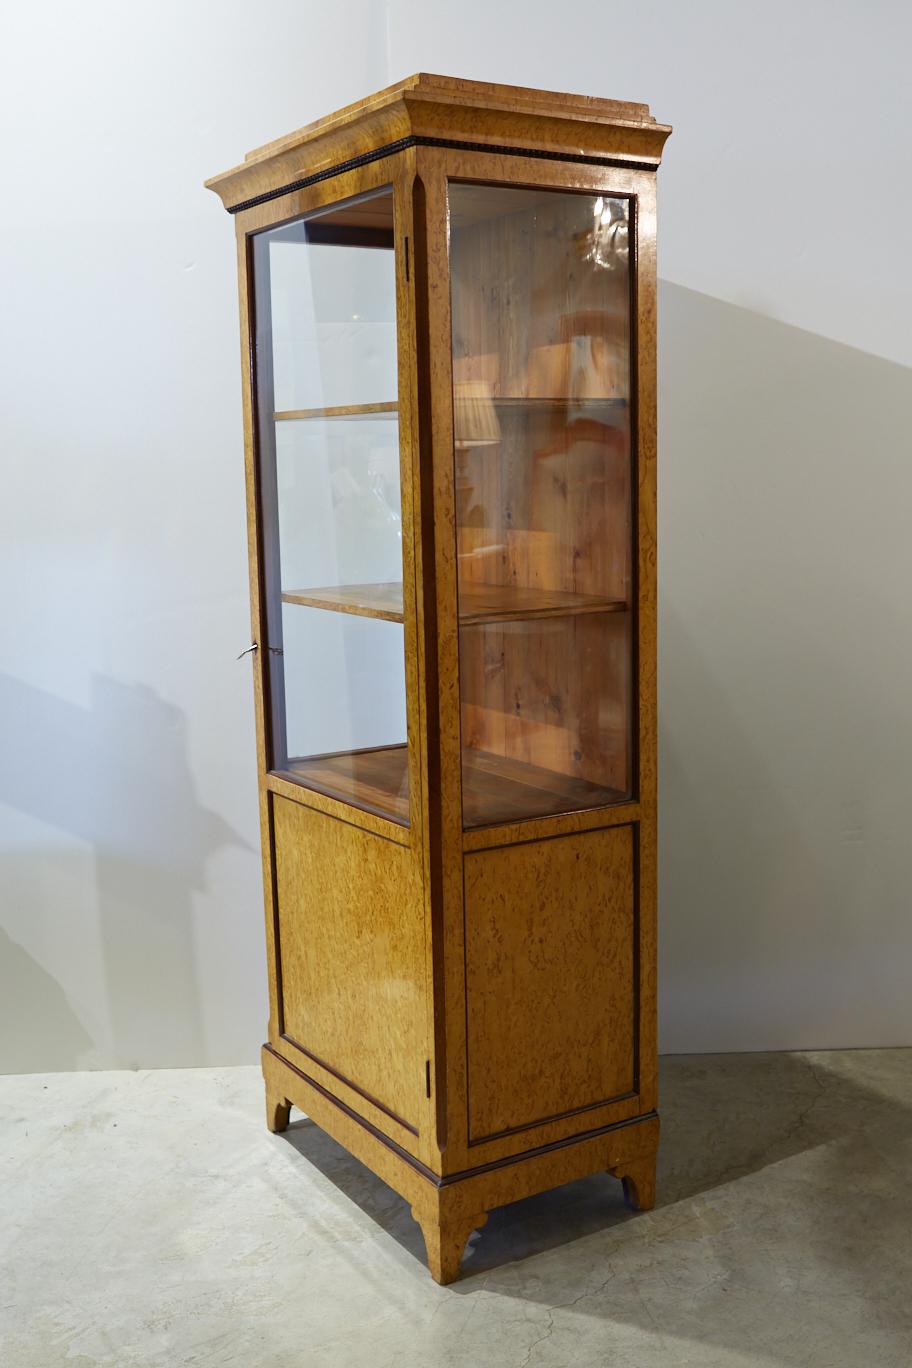 19th century Biedermeier display or curio cabinet in bird's-eye maple with brown lacquered molding trim. The door and one of the side panels appear to be antique glass; one of the side panels might be a replacement. The interior of the cabinet and